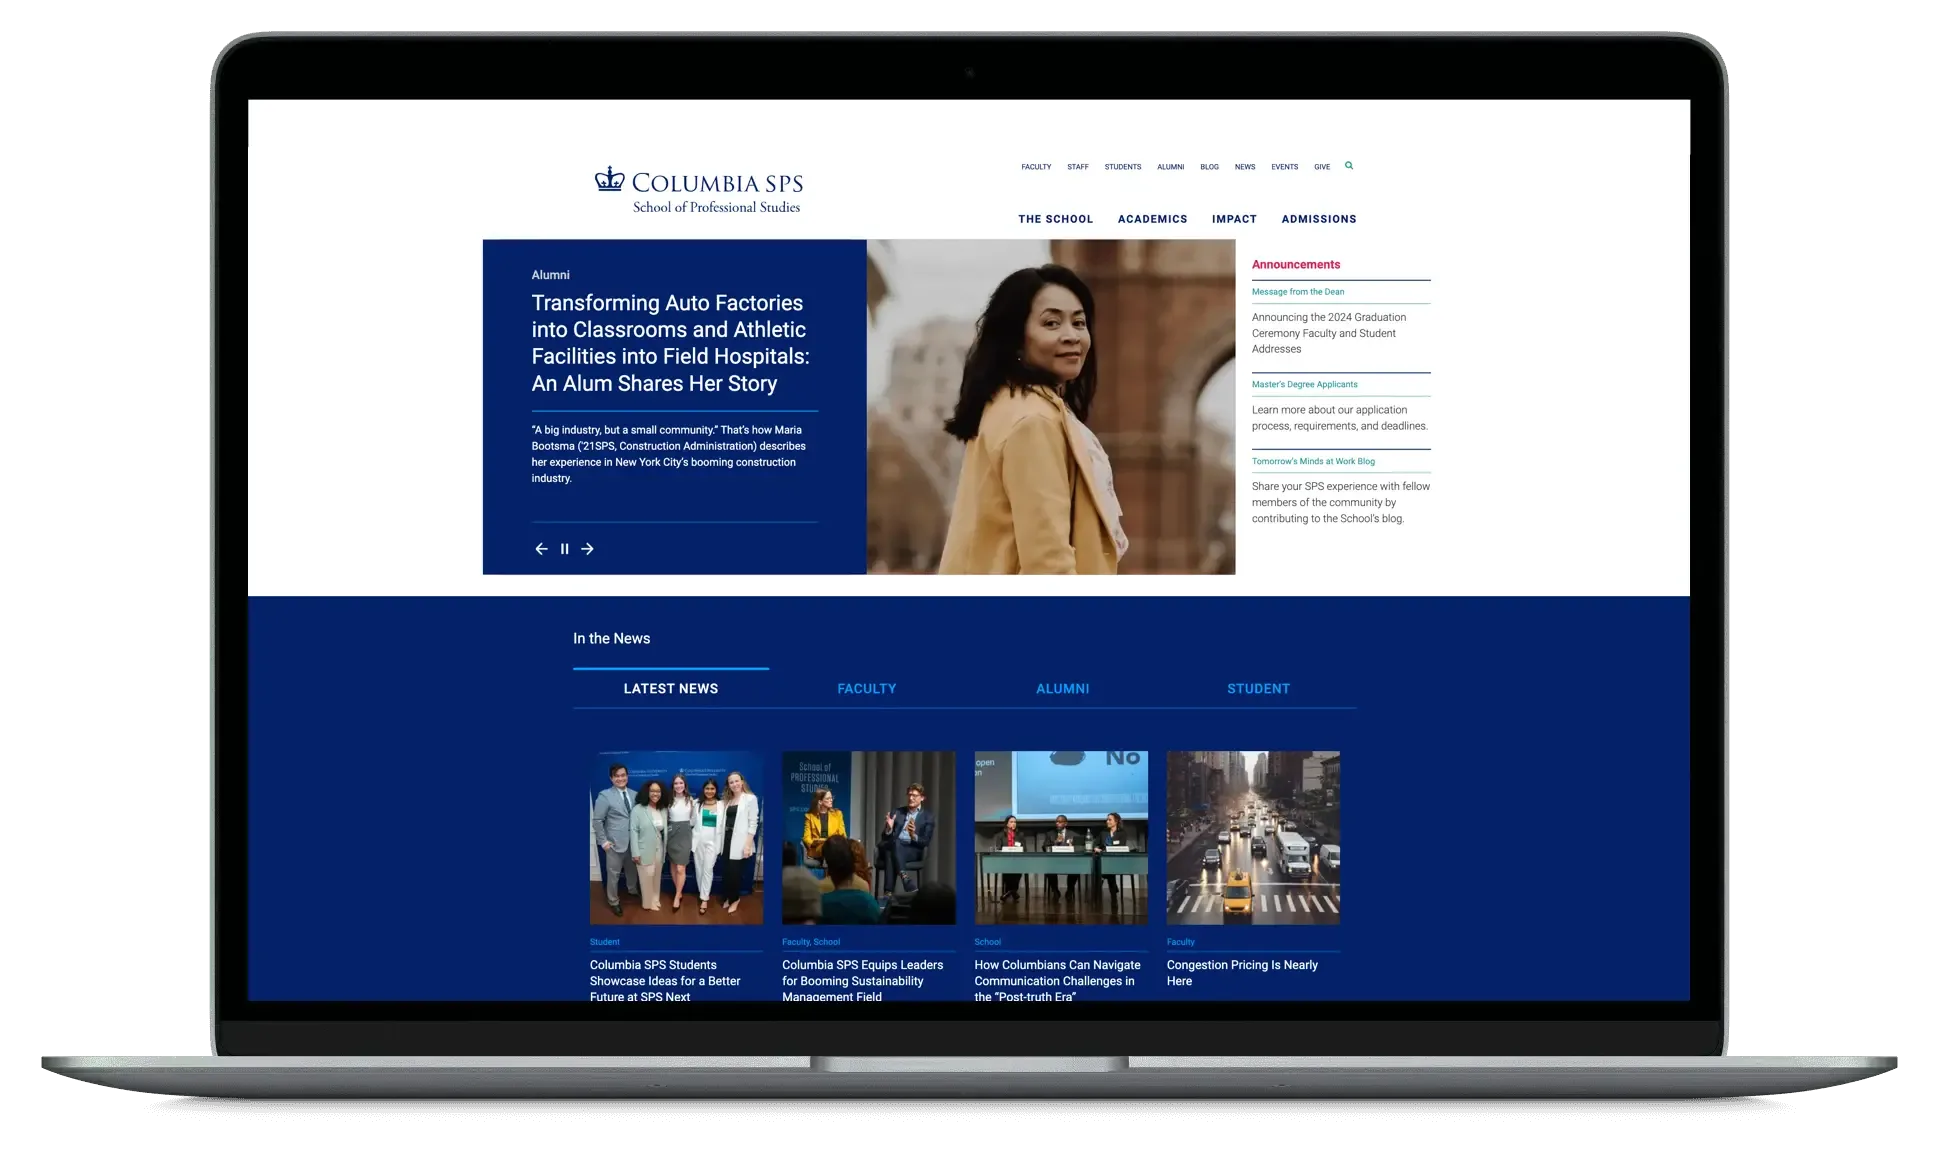 The Columbia SPS homepage